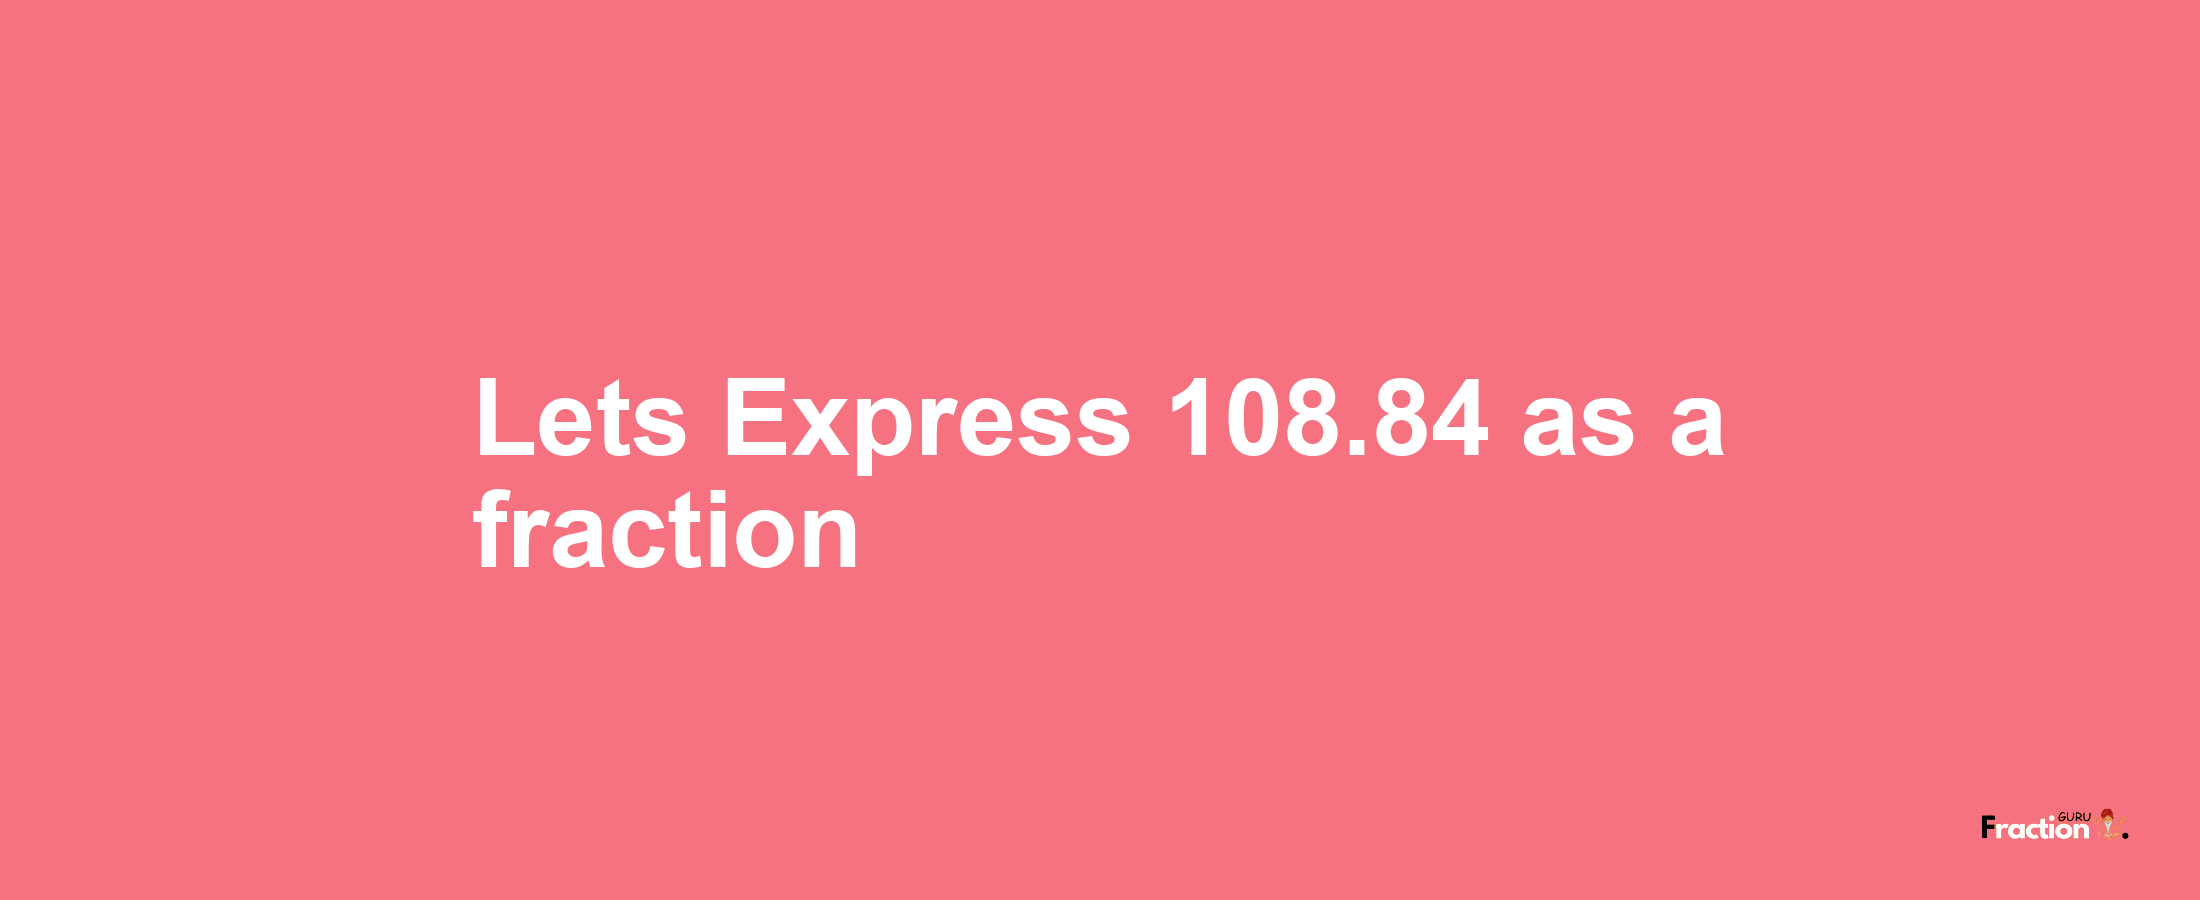 Lets Express 108.84 as afraction